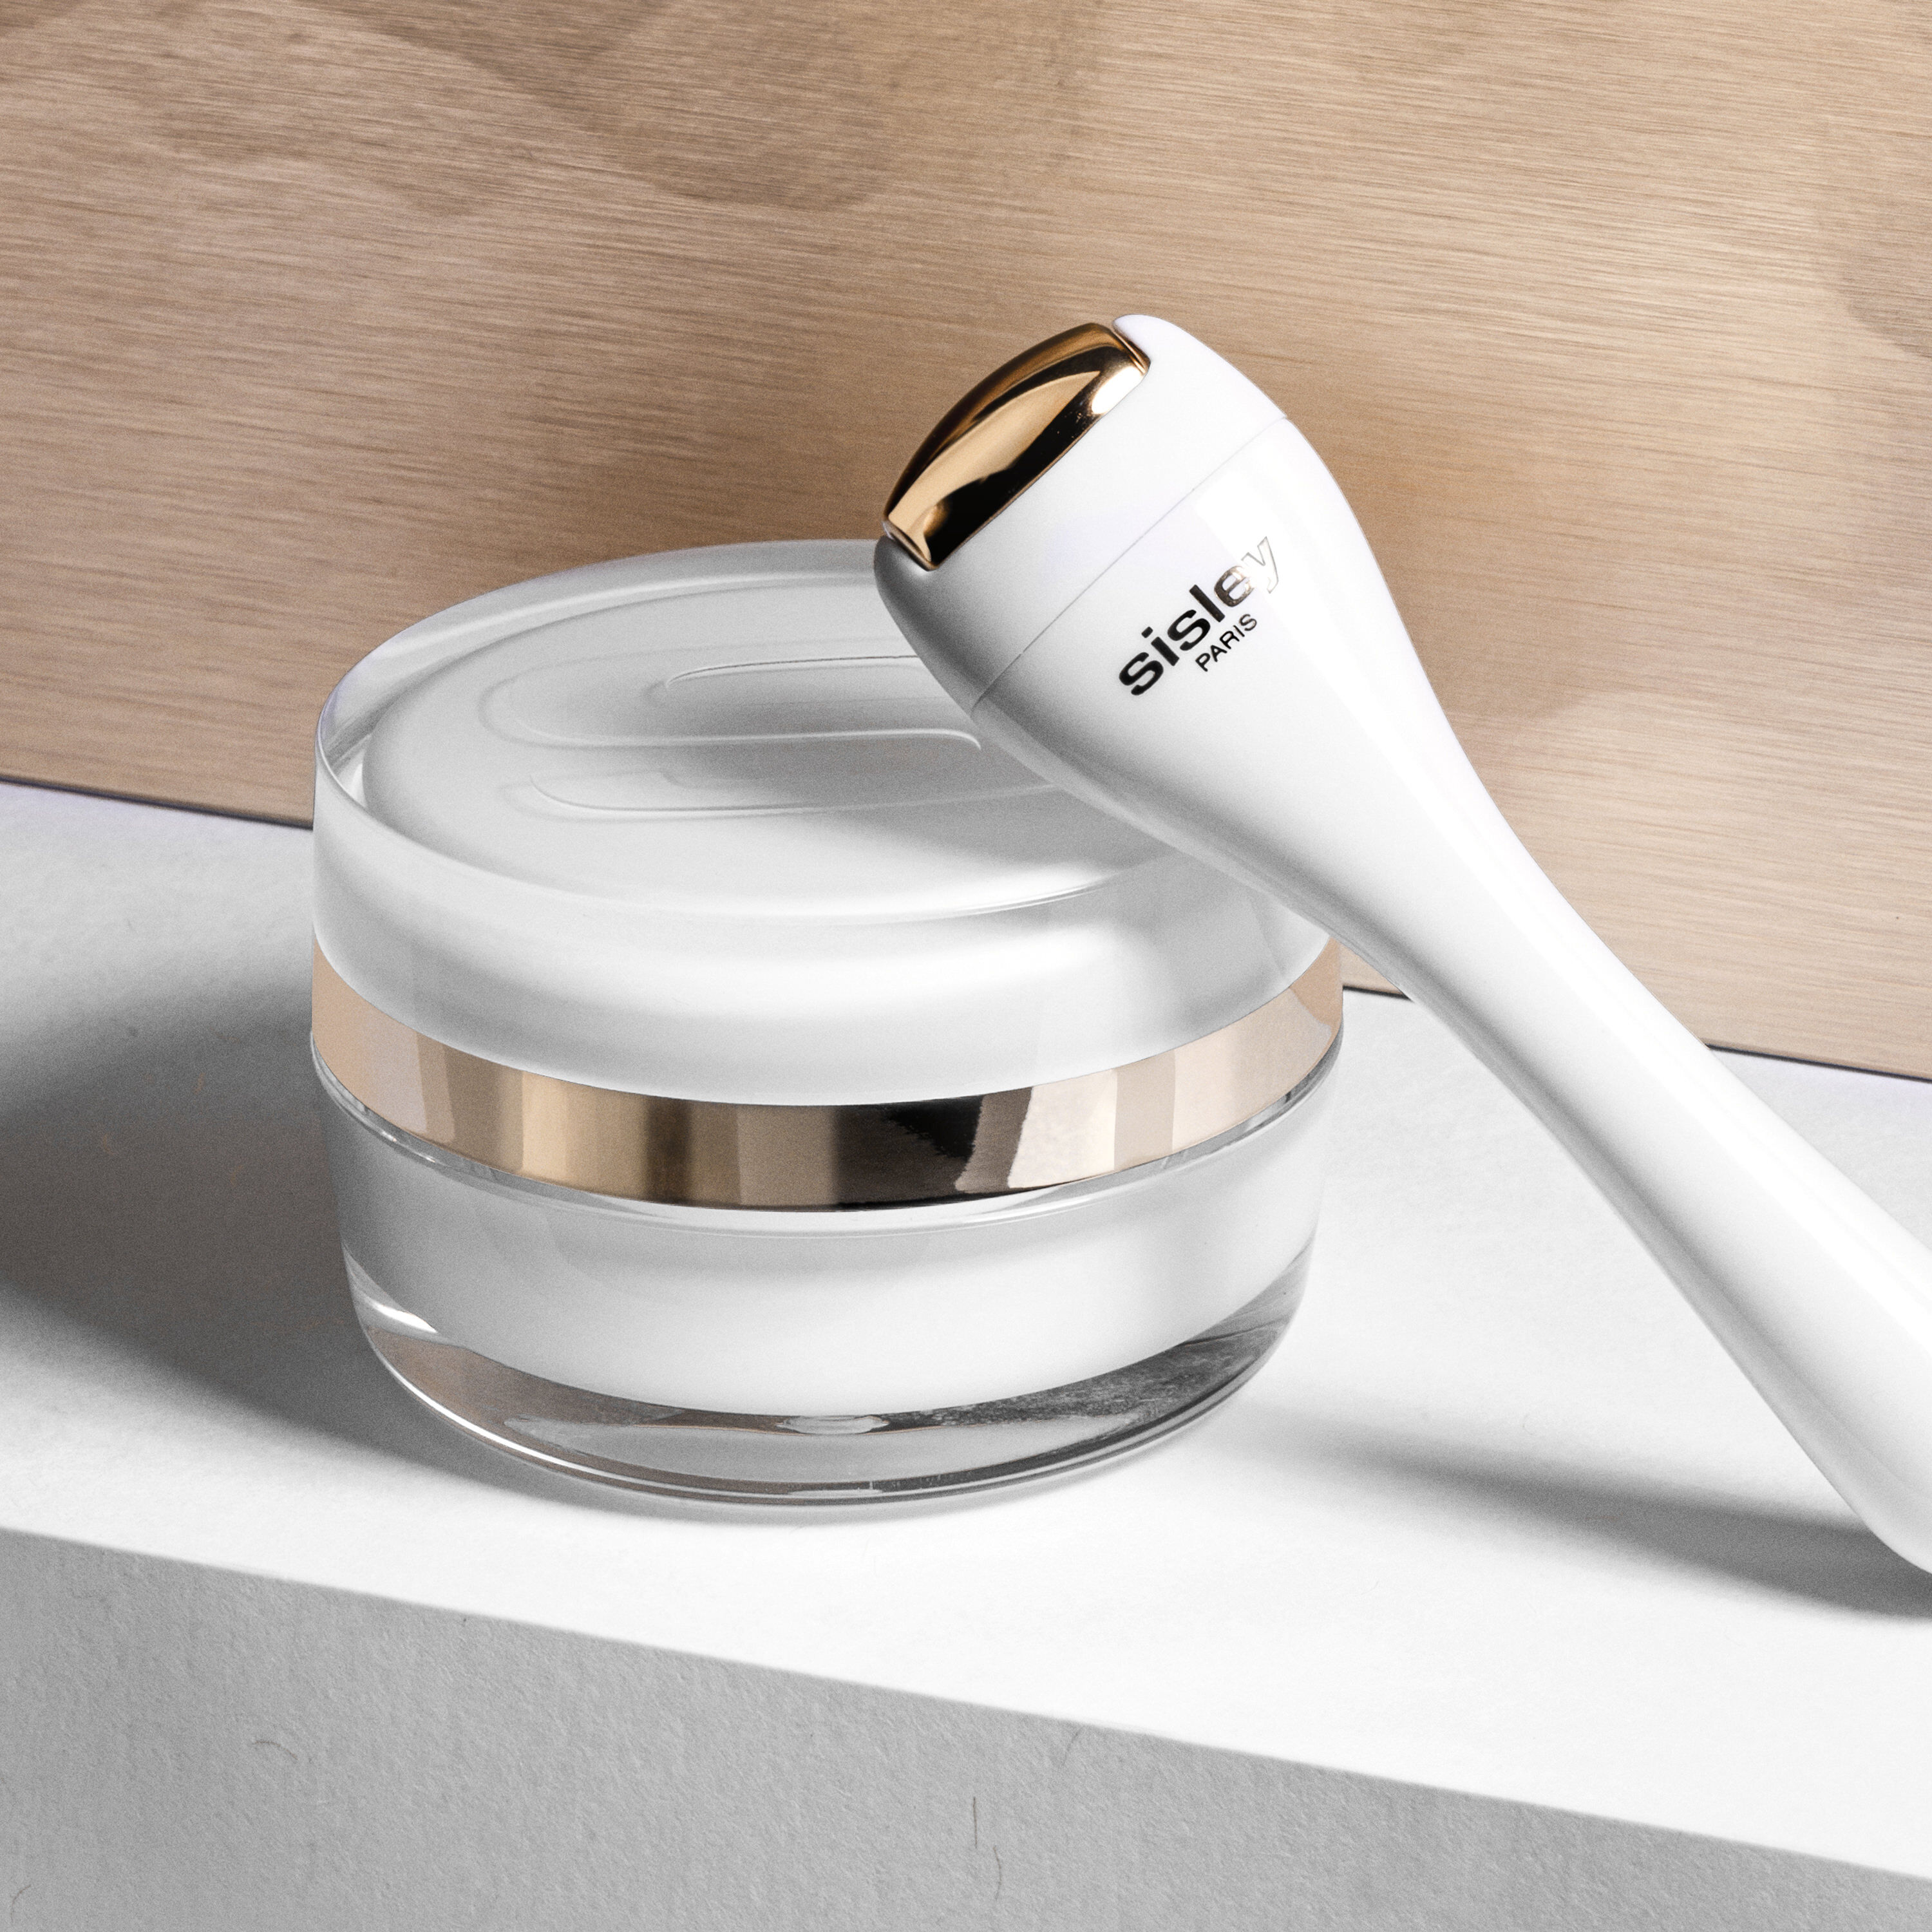 10 Best Sisley Skincare Products to Look Out for in 2023